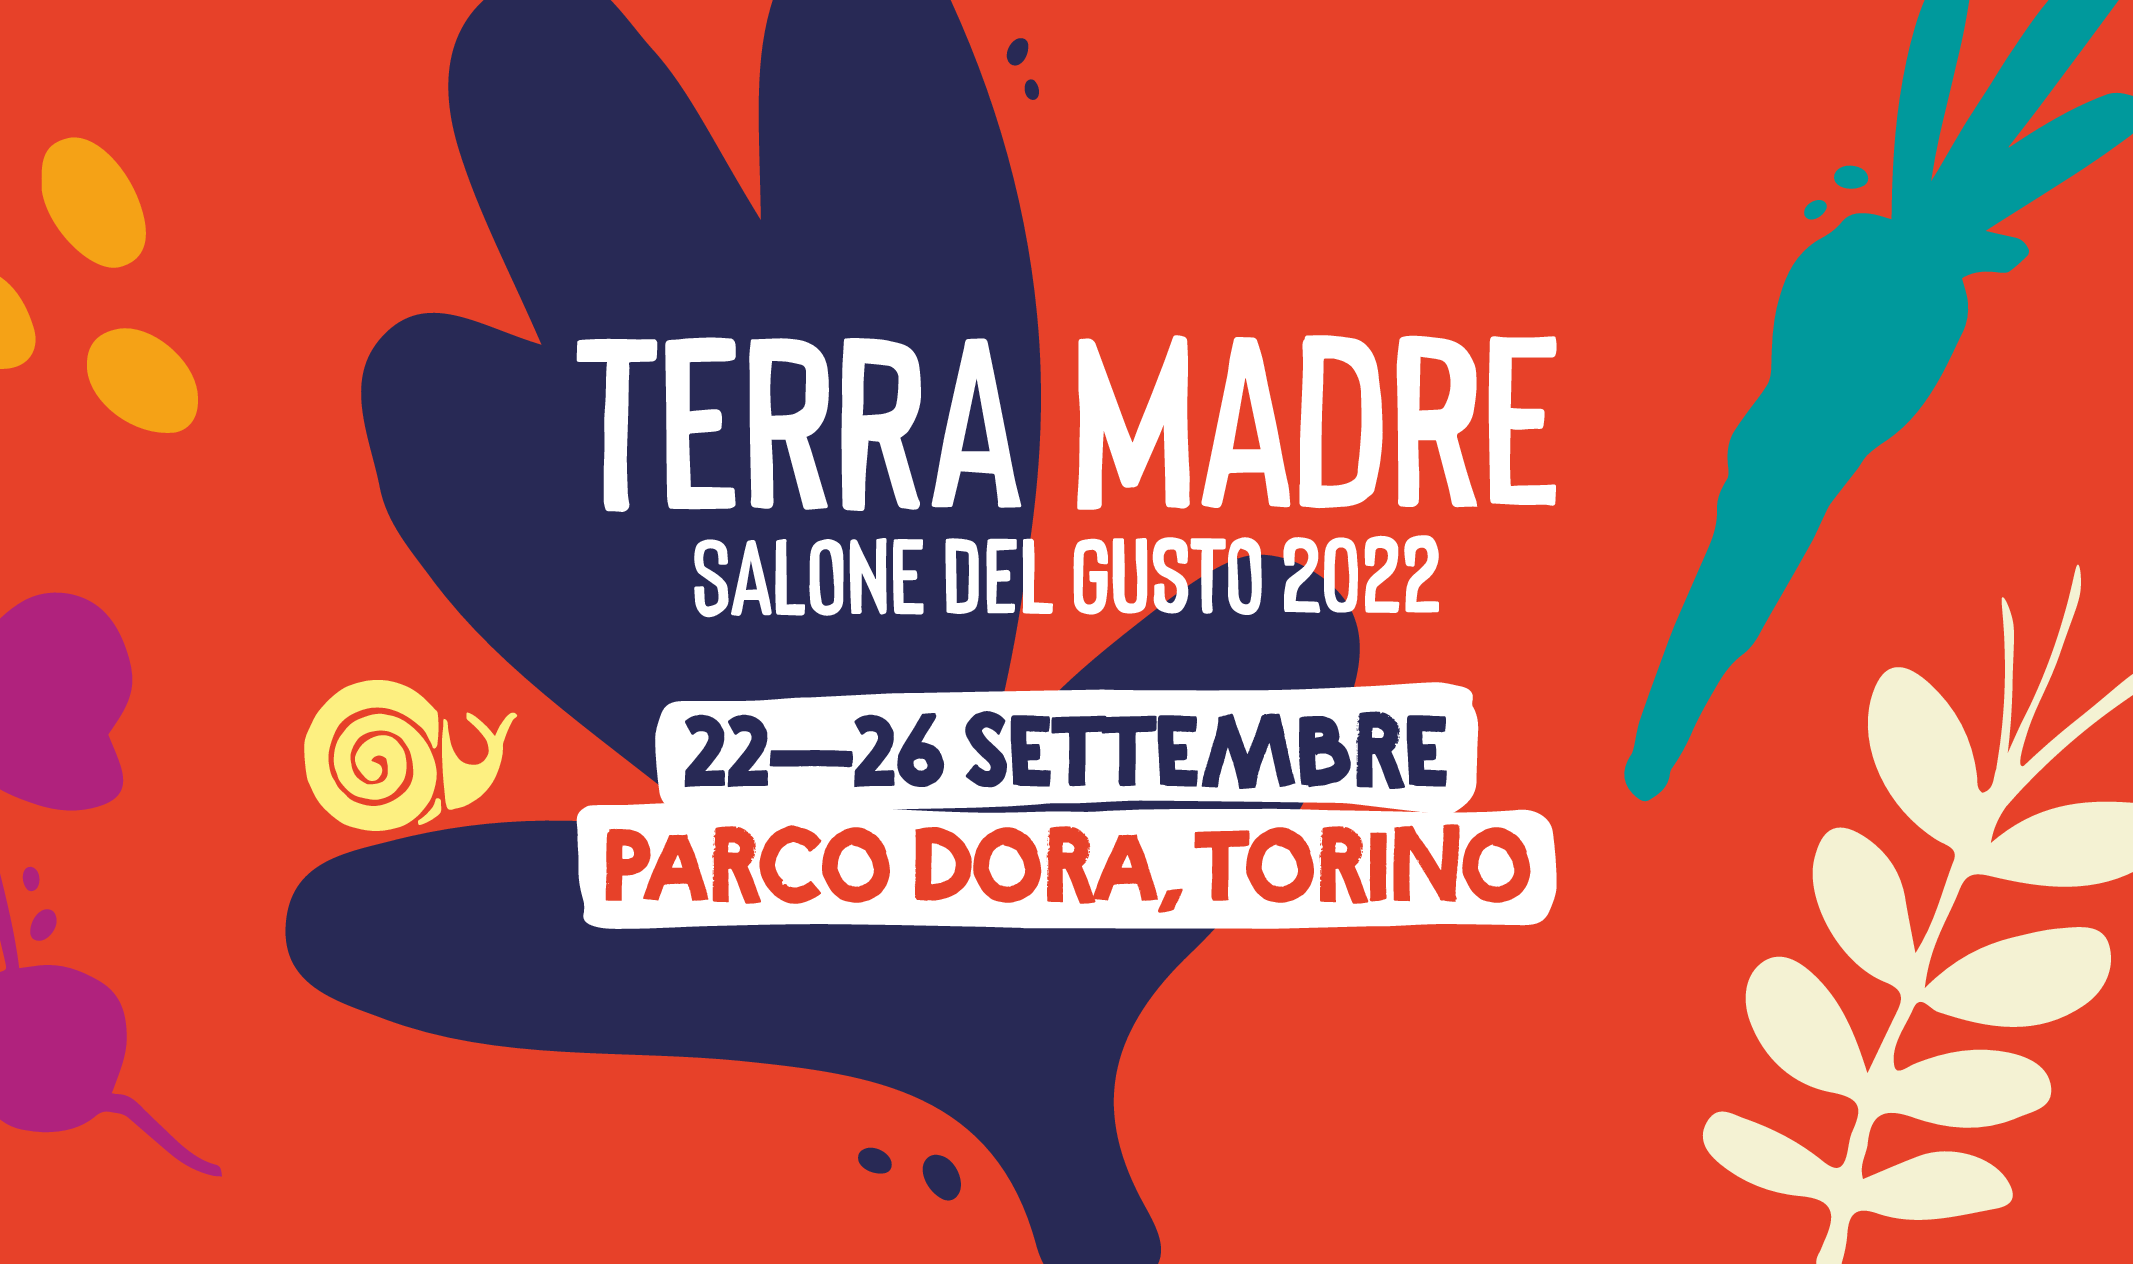 Terra Madre Salone del Gusto, Piedmont Region Ambassador of Italian Food and Wine Culture in the World With a Historic Reputation